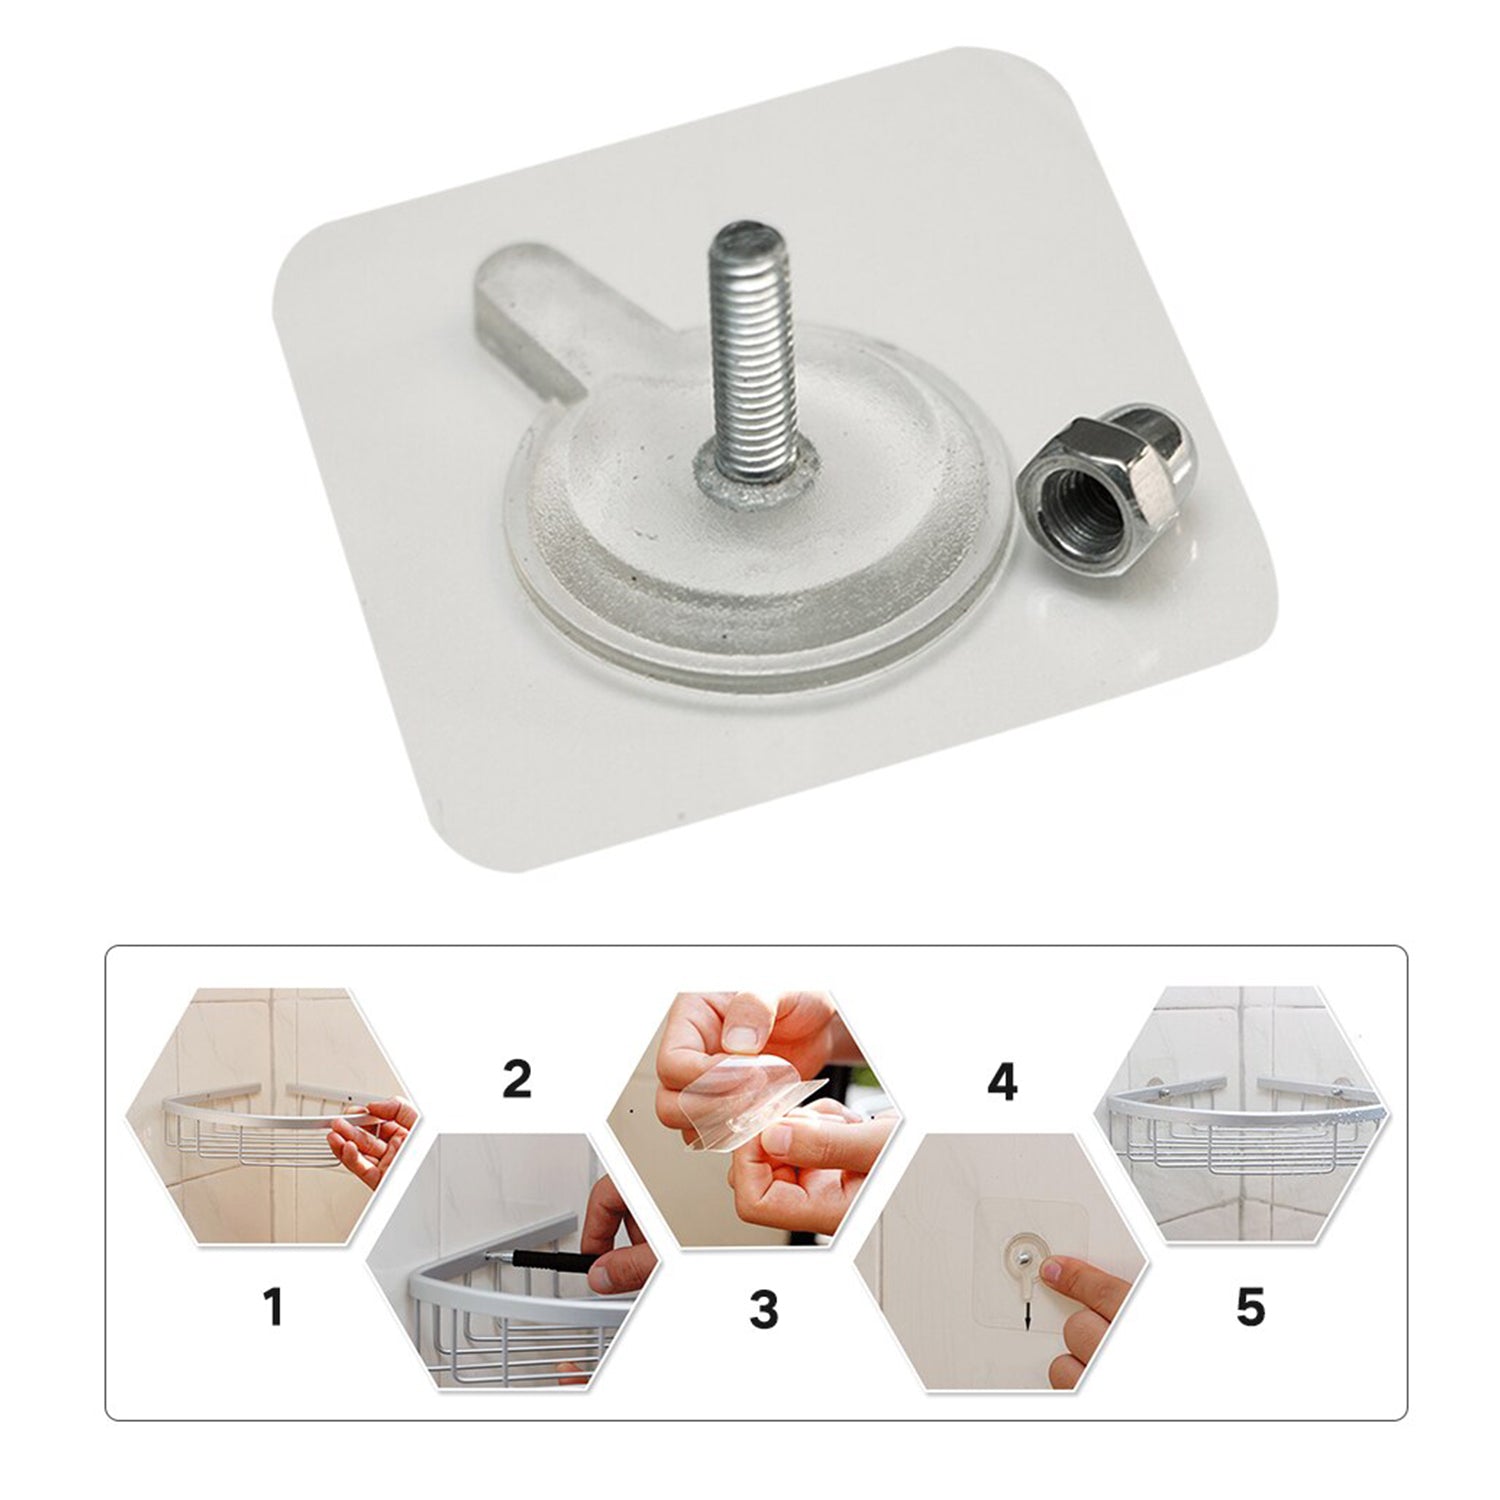 9017 Adhesive Screw Wall Hook used in all kinds of places including household and offices for hanging and holding stuffs etc. DeoDap